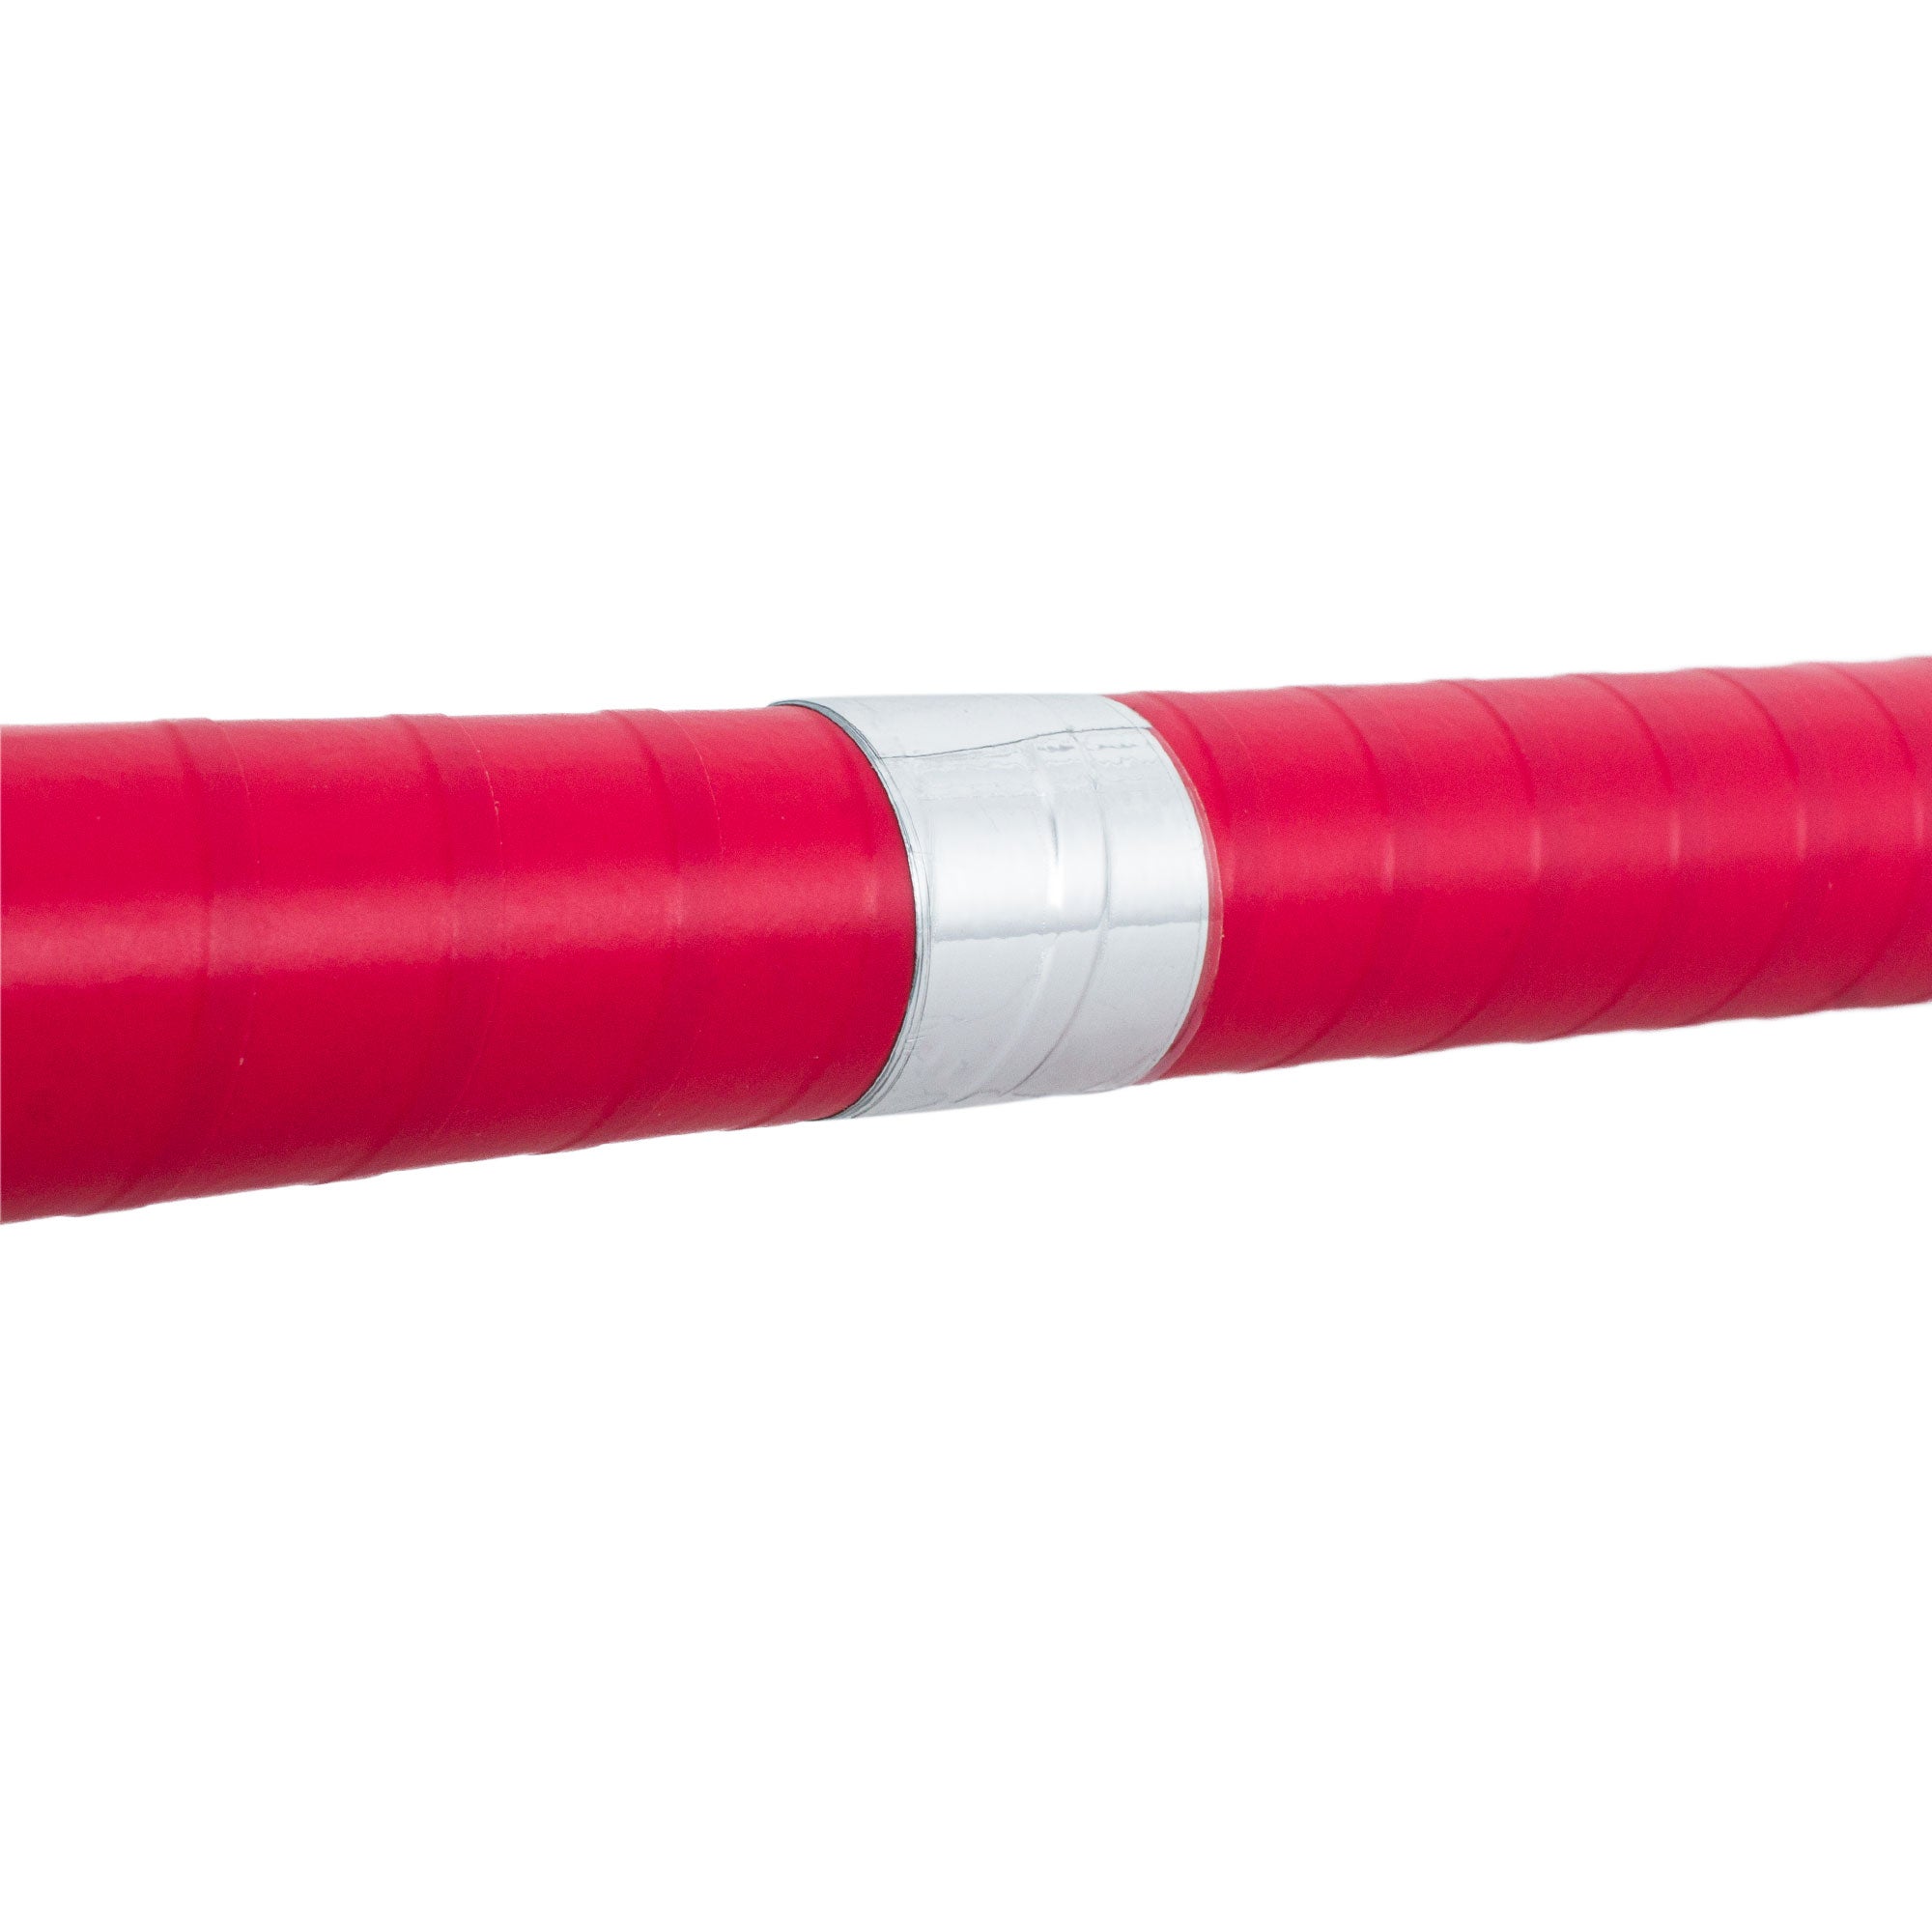 tapered centre point of fire devilstick marked with silver tape on red tape